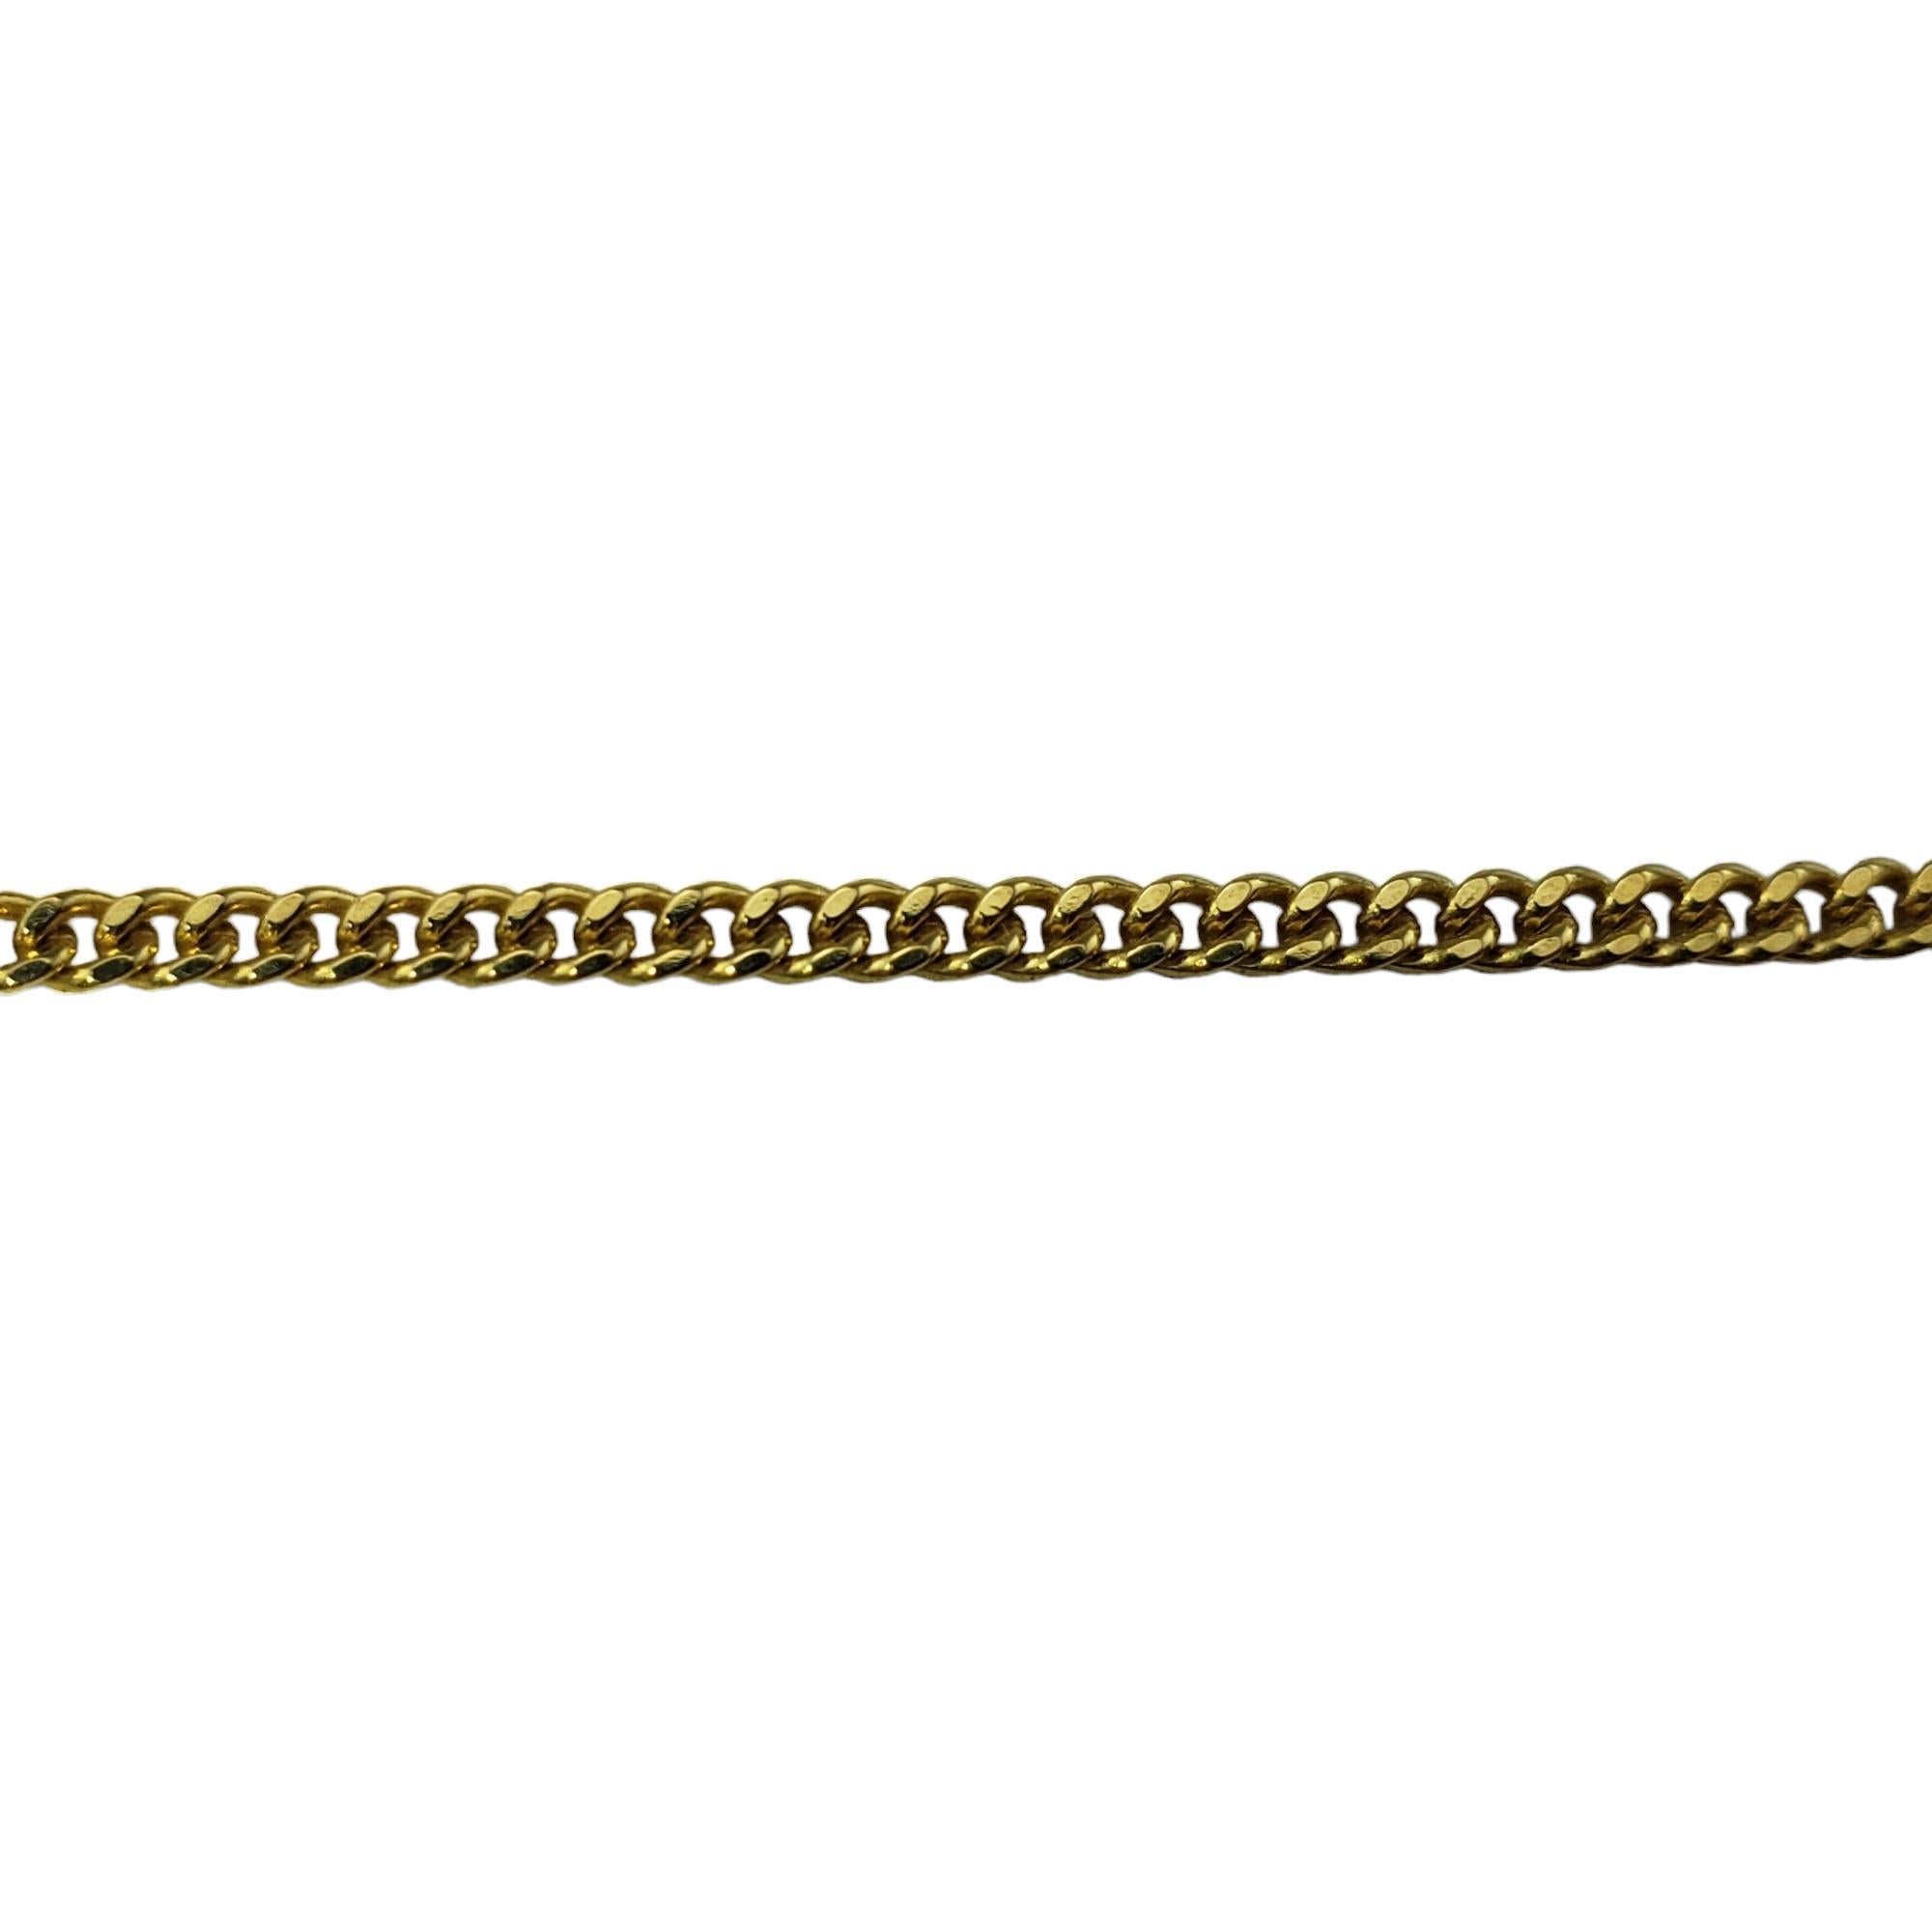 Vintage 18 Karat Yellow Gold Chain Necklace-

This elegant chain necklace is crafted in meticulously detailed 18K yellow gold.  Width:  2 mm.

Size: 19.75 inches

Stamped: 750

Weight:  8.0 gr./  5.1 dwt.

Very good condition, professionally